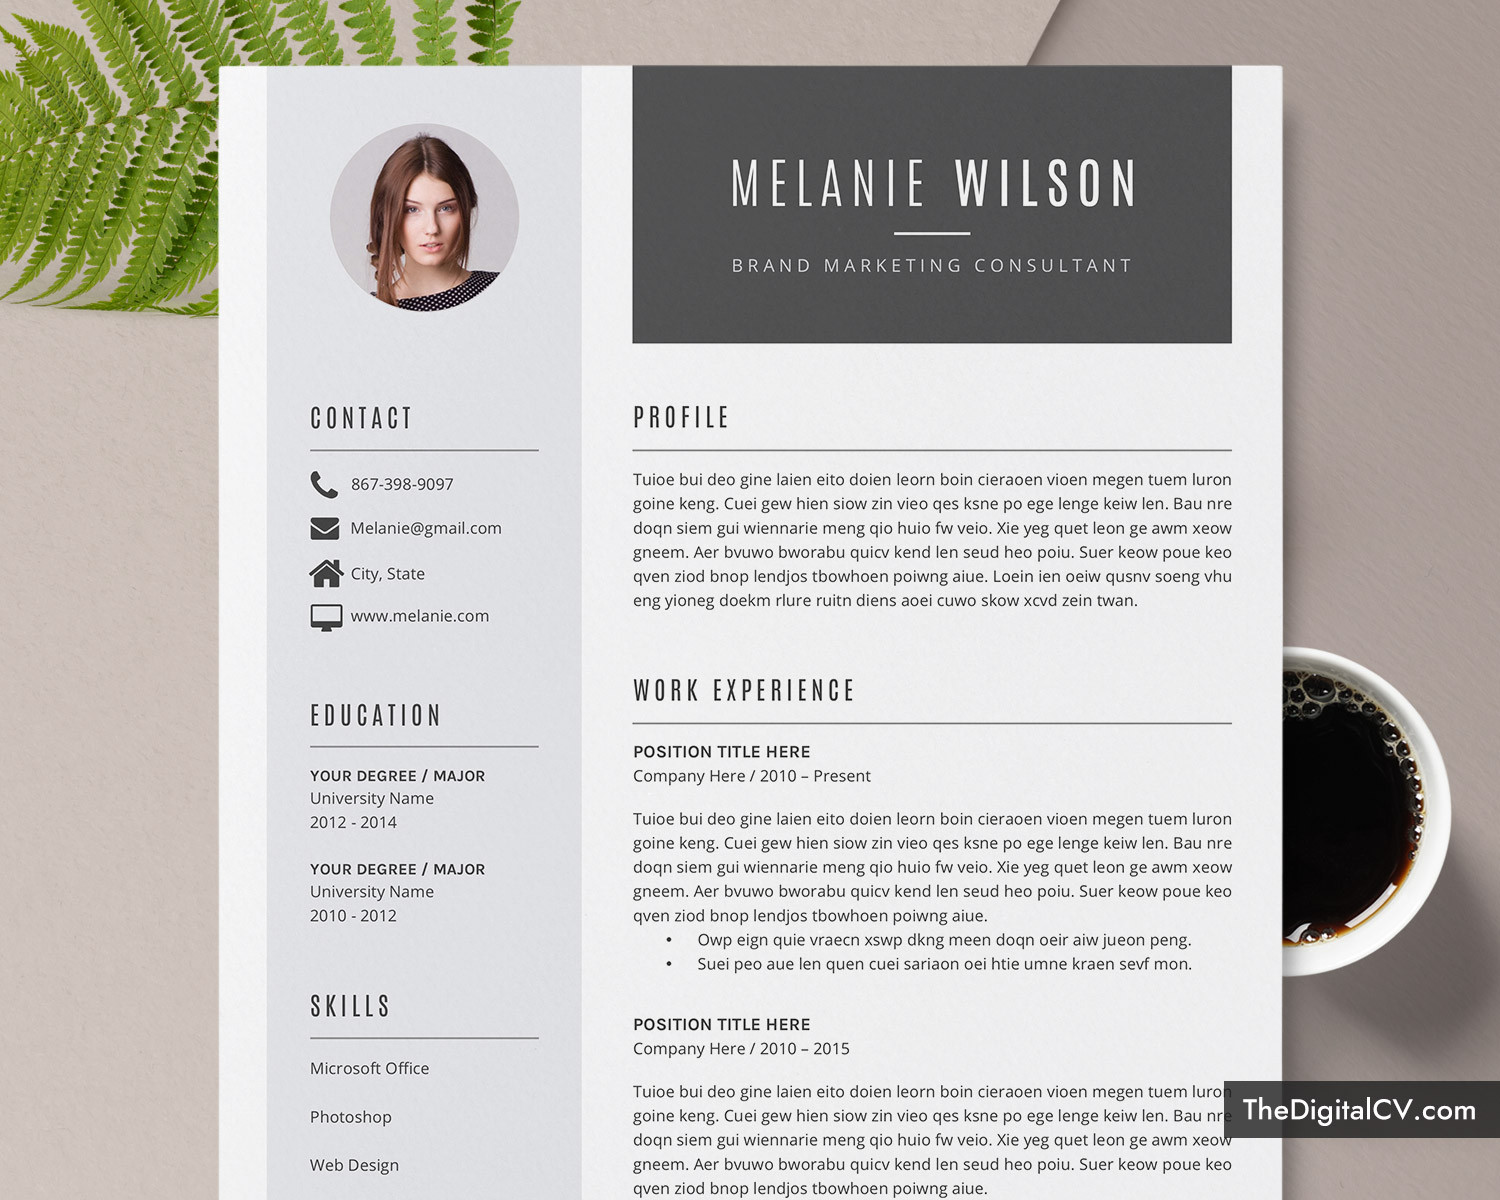 Download Curriculum Vitae Cv Resume Templates Modern Cv Template for Microsoft Word, Professional Curriculum Vitae Template, 1, 2, 3 Page Resume Template, Simple and Creative Resume Template …